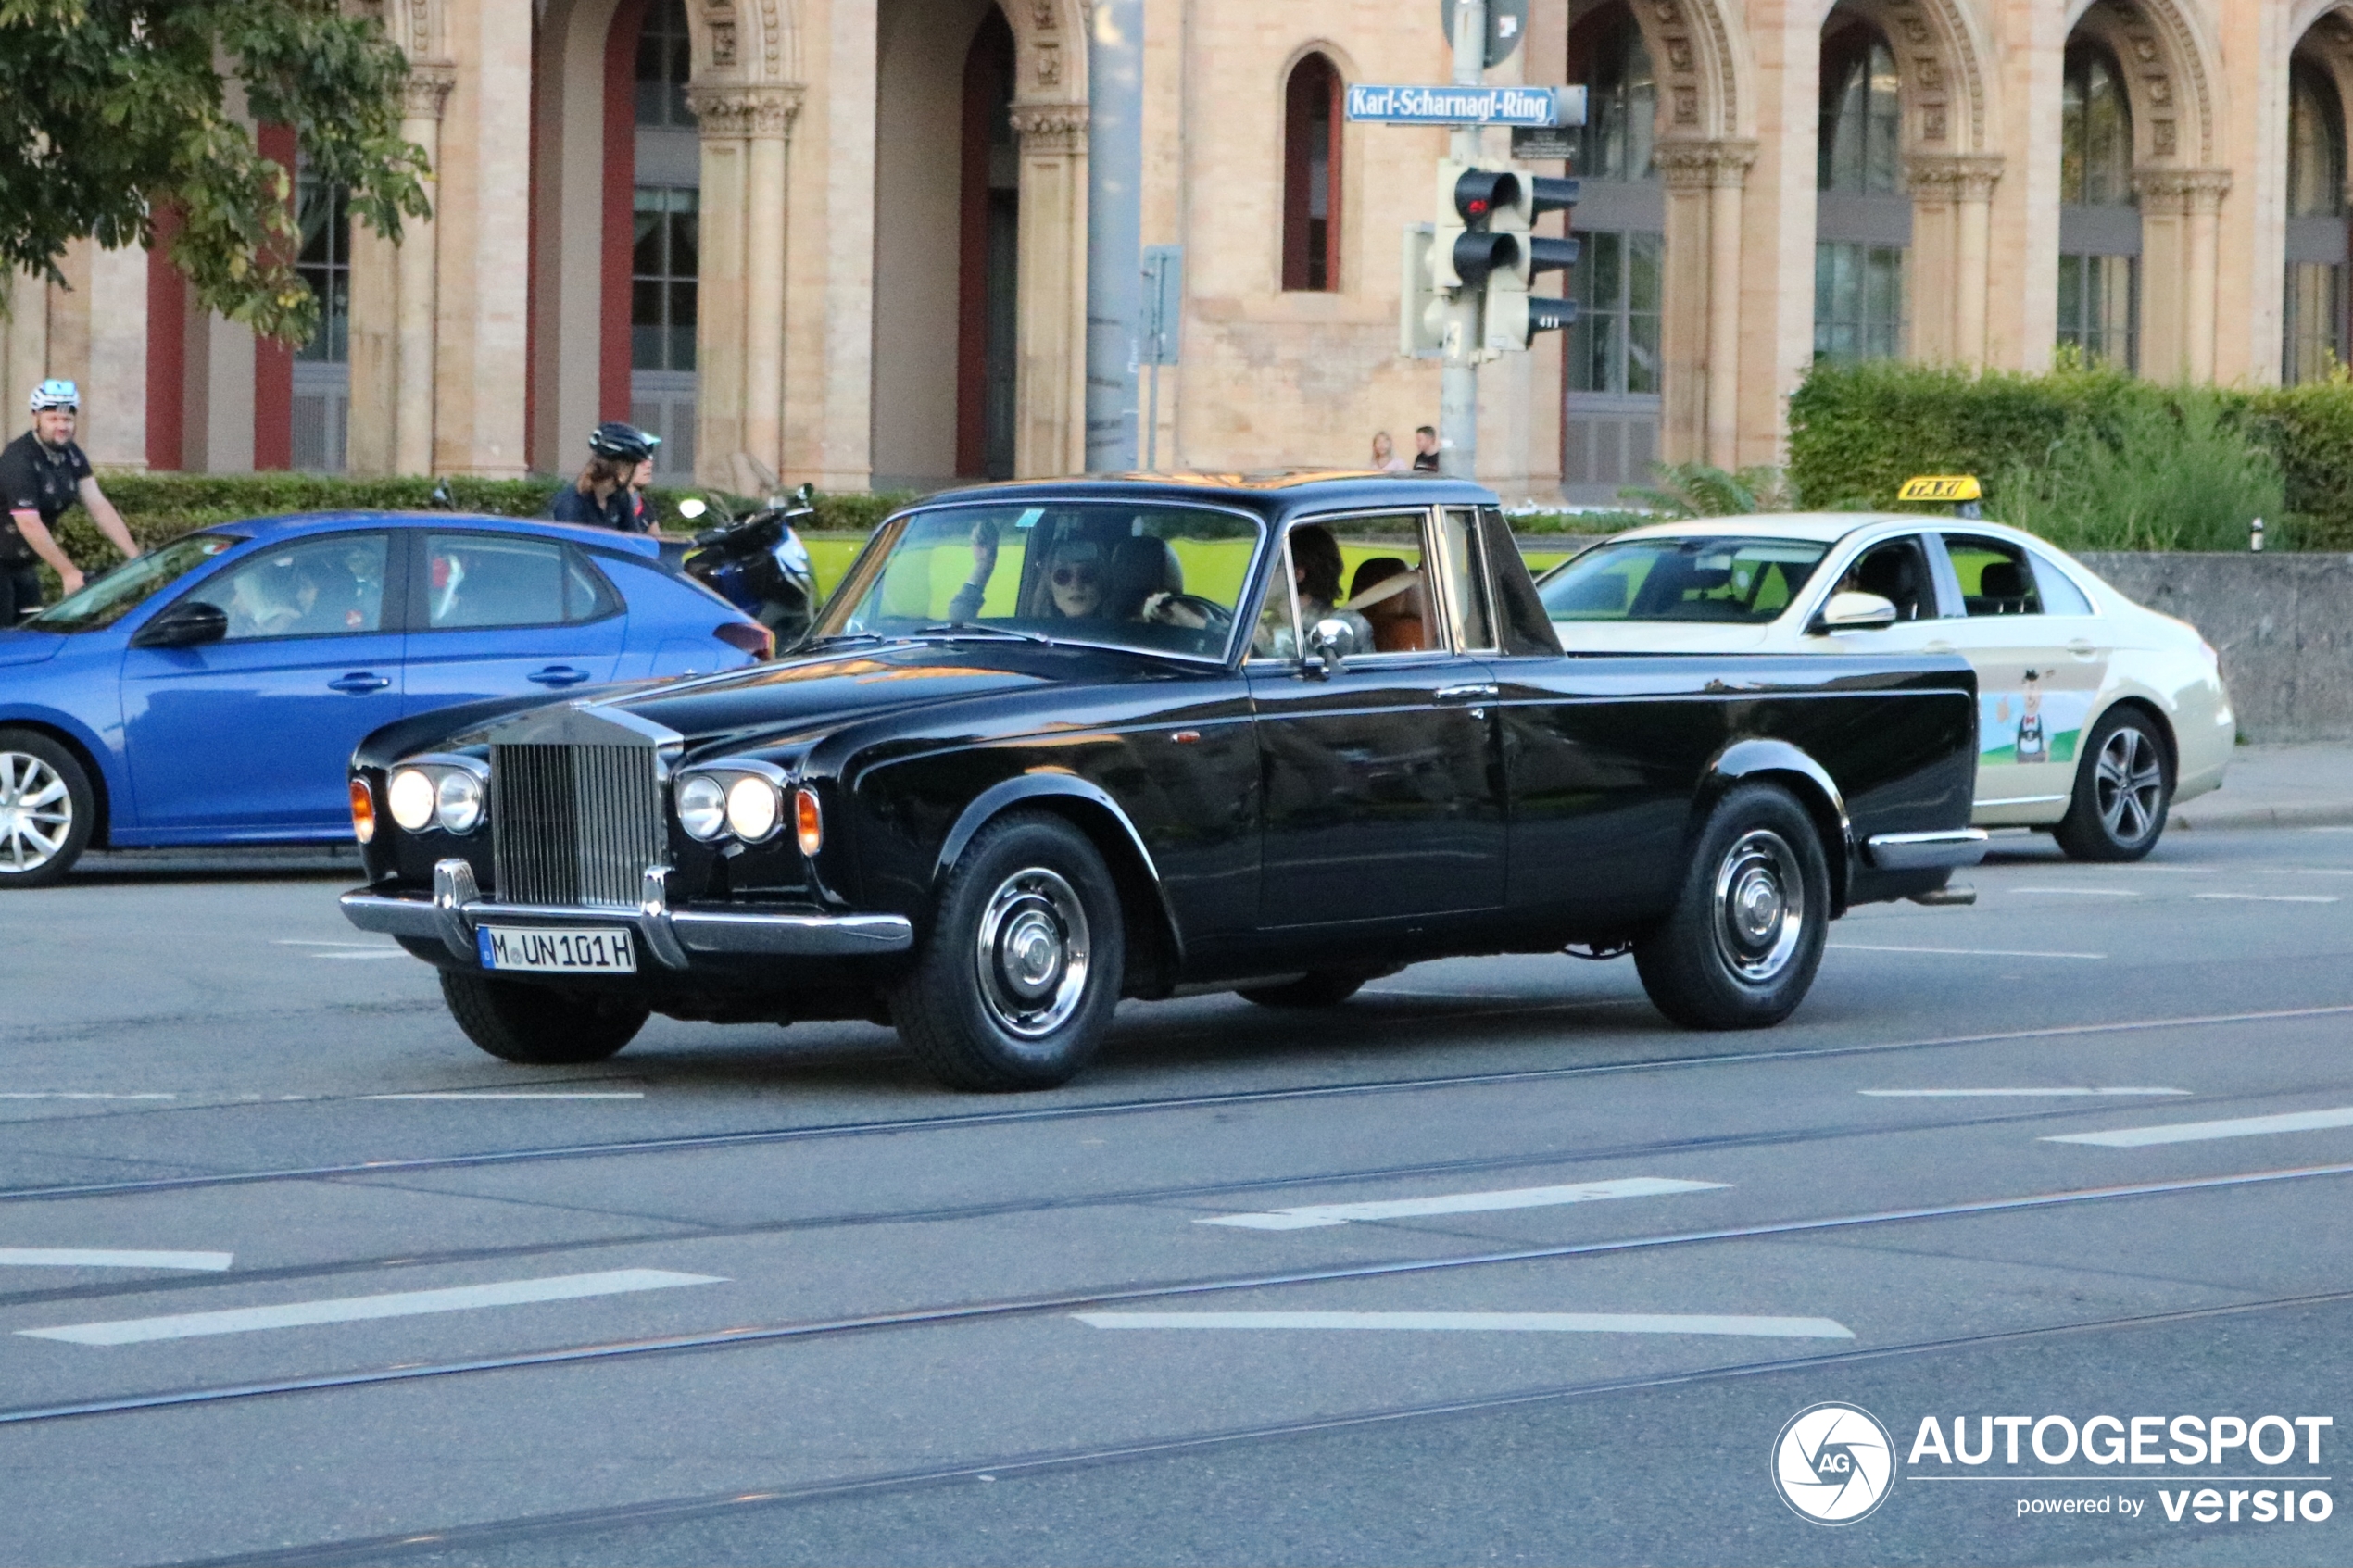 A rare Rolls-Royce Silver Shadow Pick-up shows up in Munich